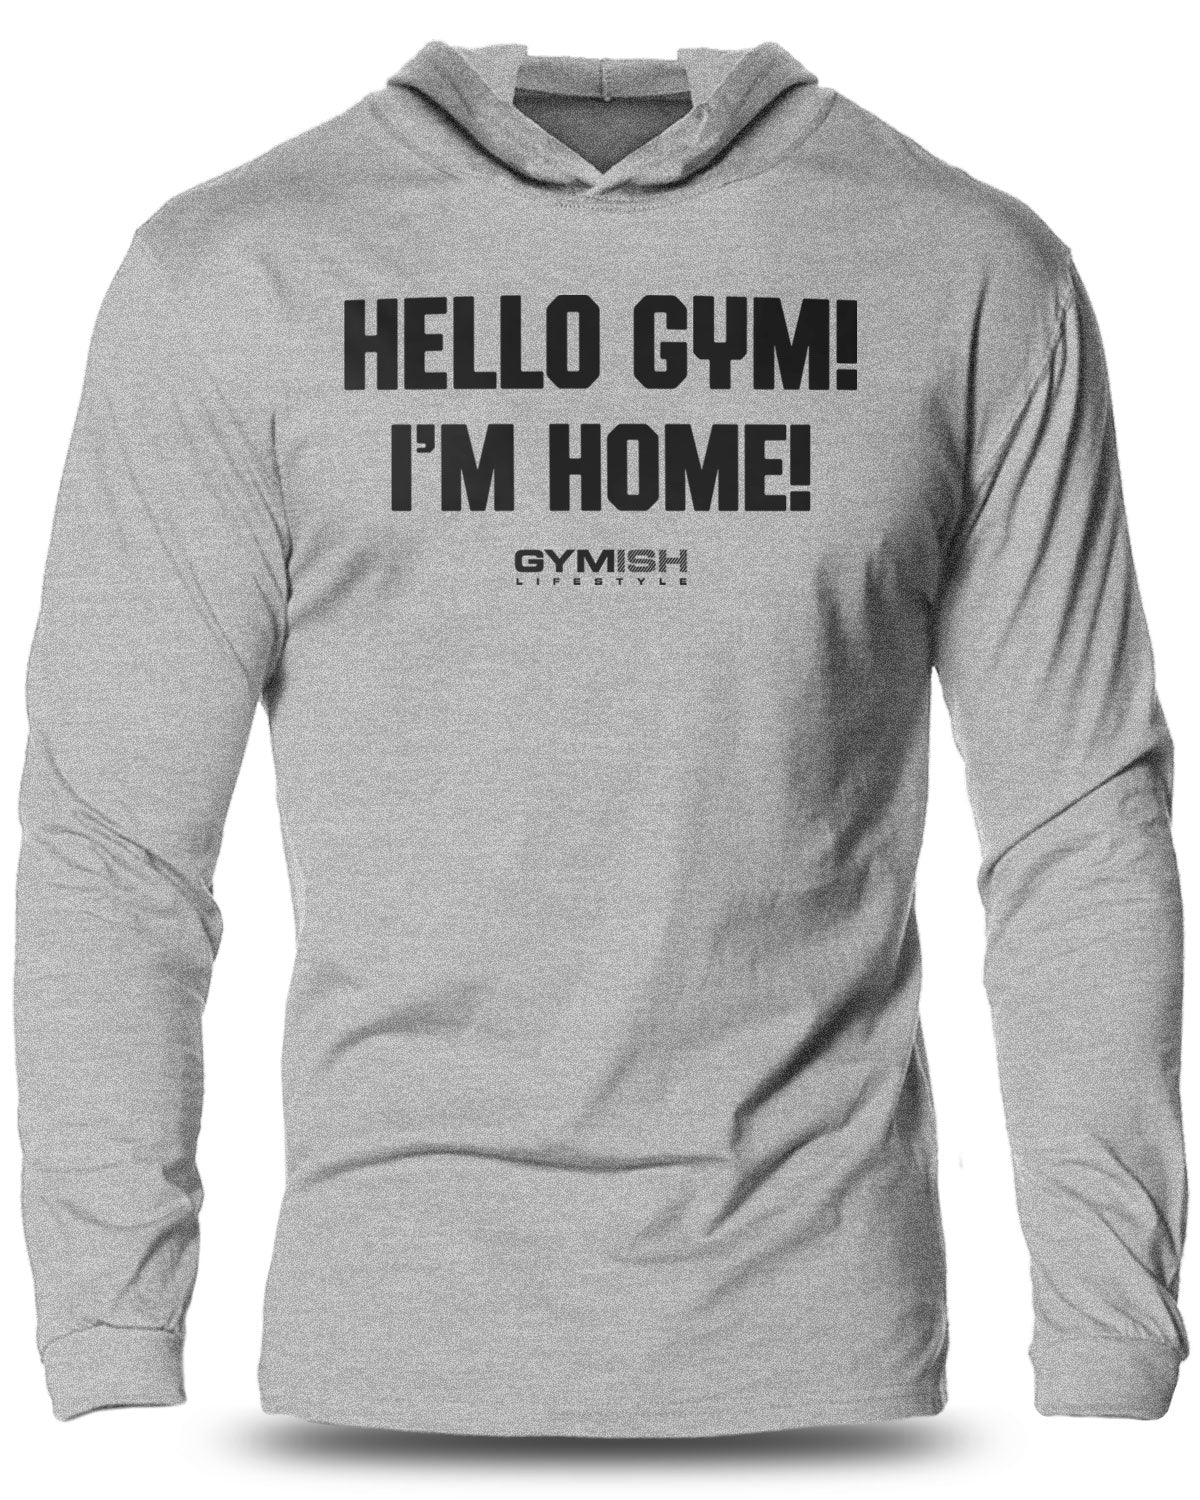 086- Hello, Gym! I'm Home! Lightweight Long Sleeve Hooded T-shirt for Men